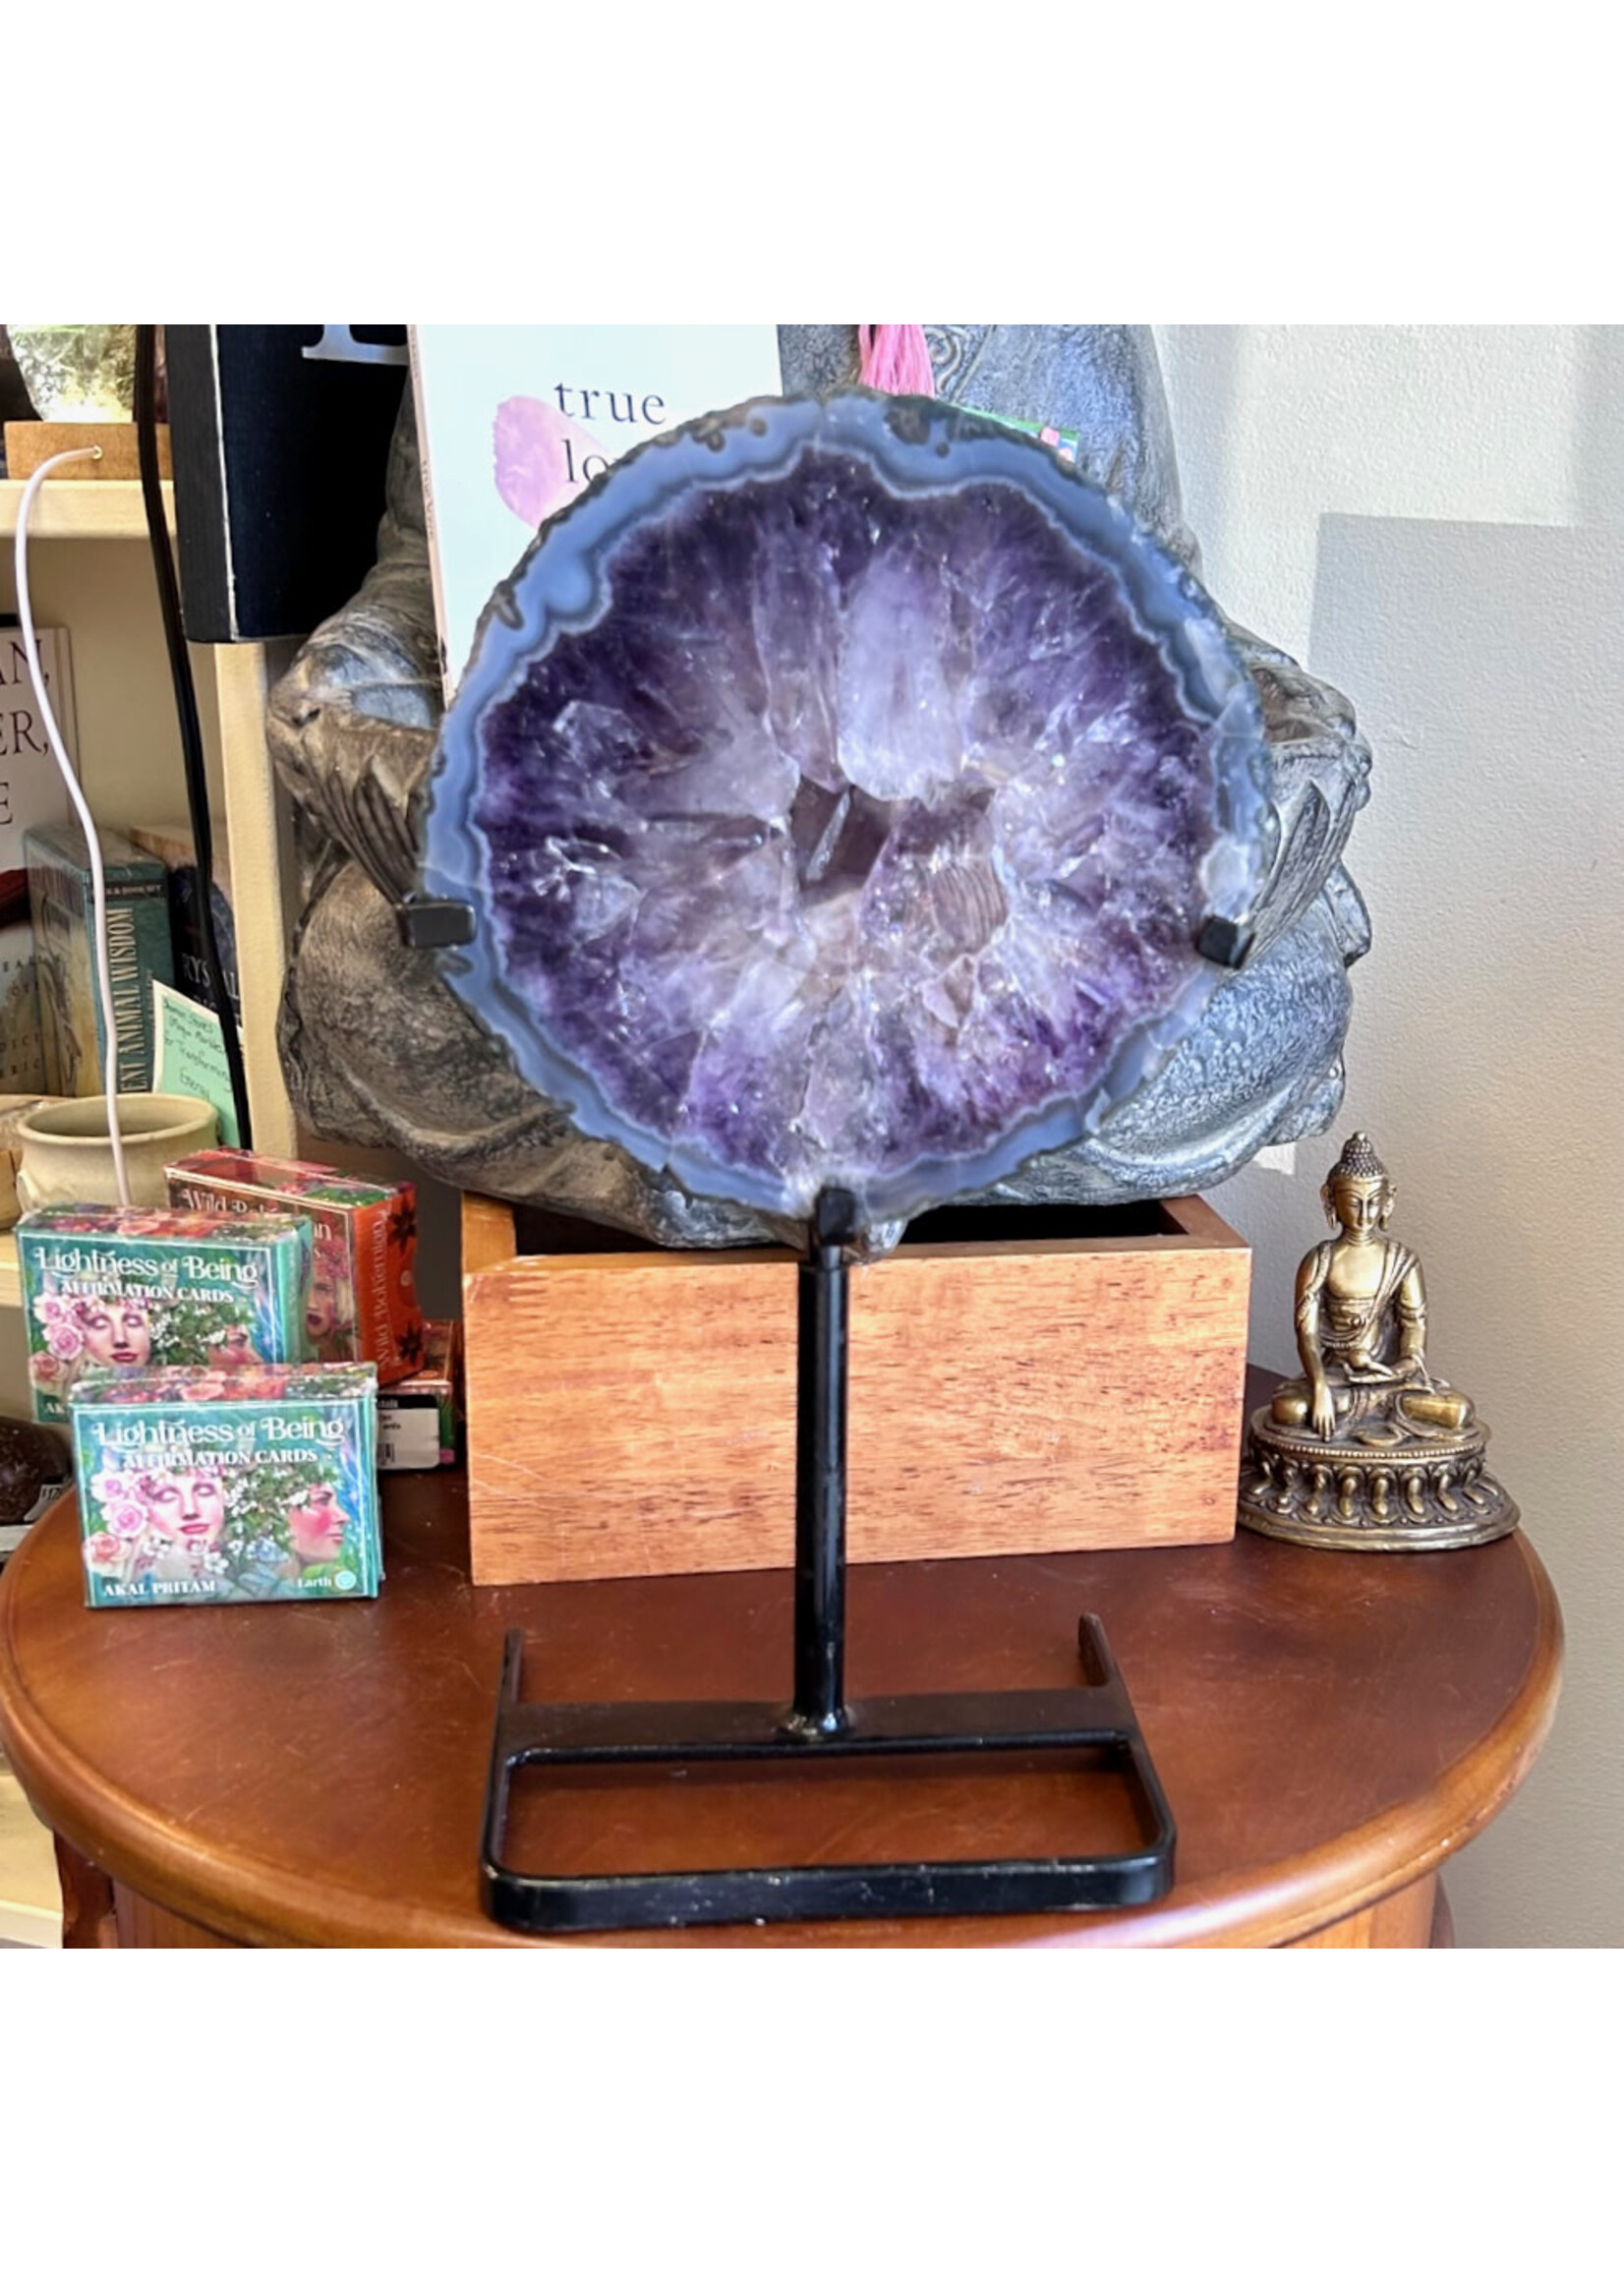 Amethyst Geode Portal Slice on stand for crossing dimensions